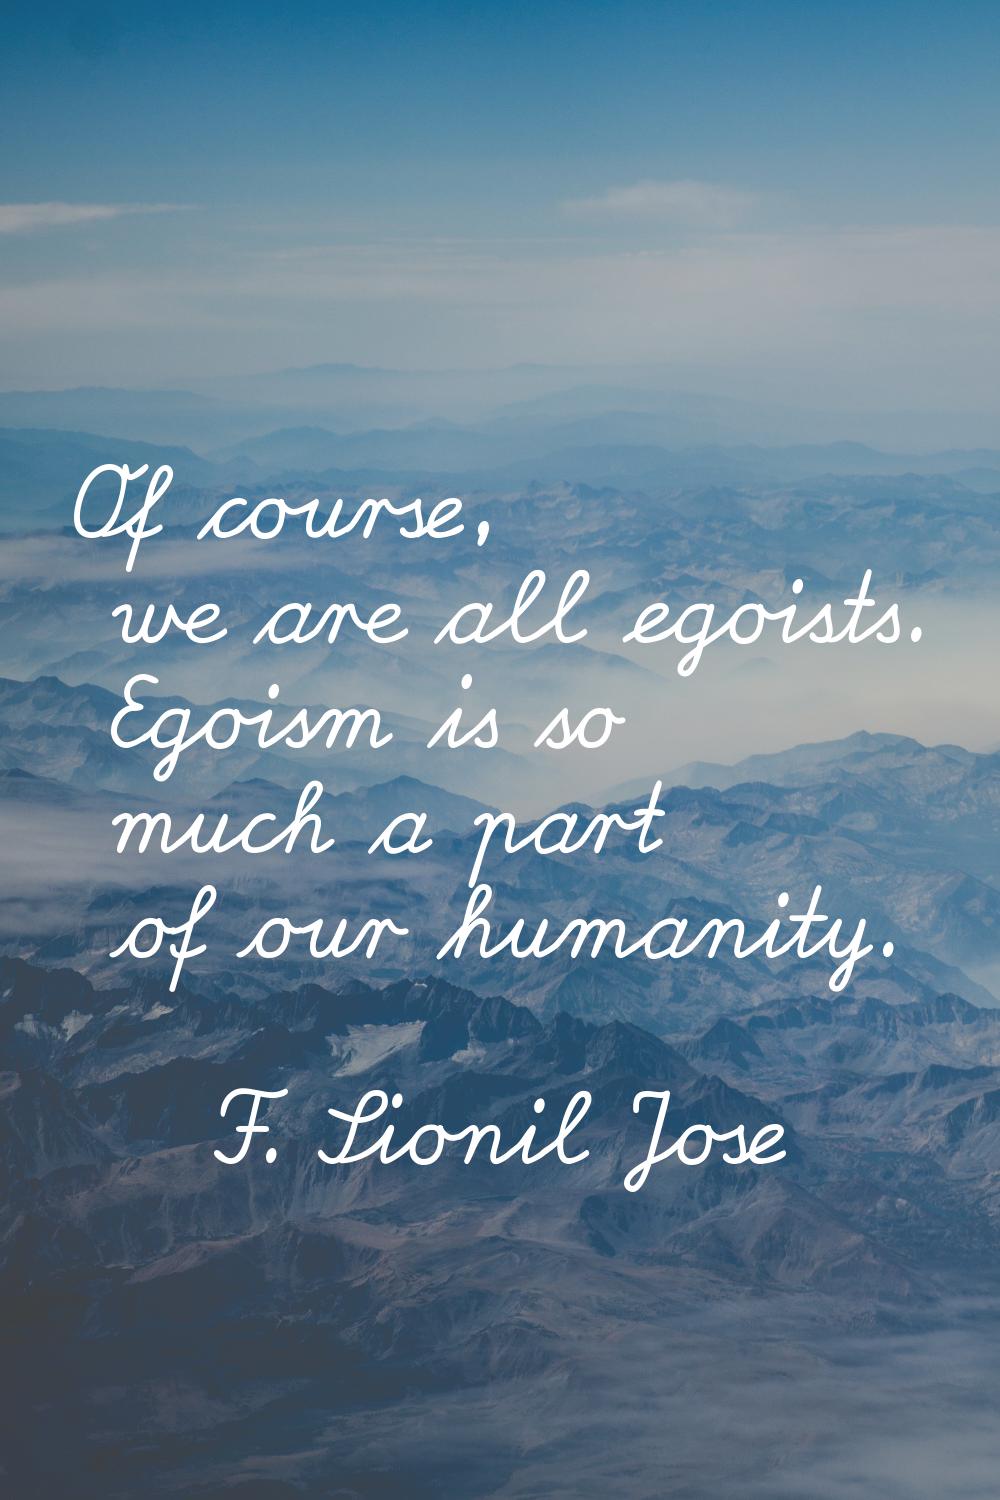 Of course, we are all egoists. Egoism is so much a part of our humanity.